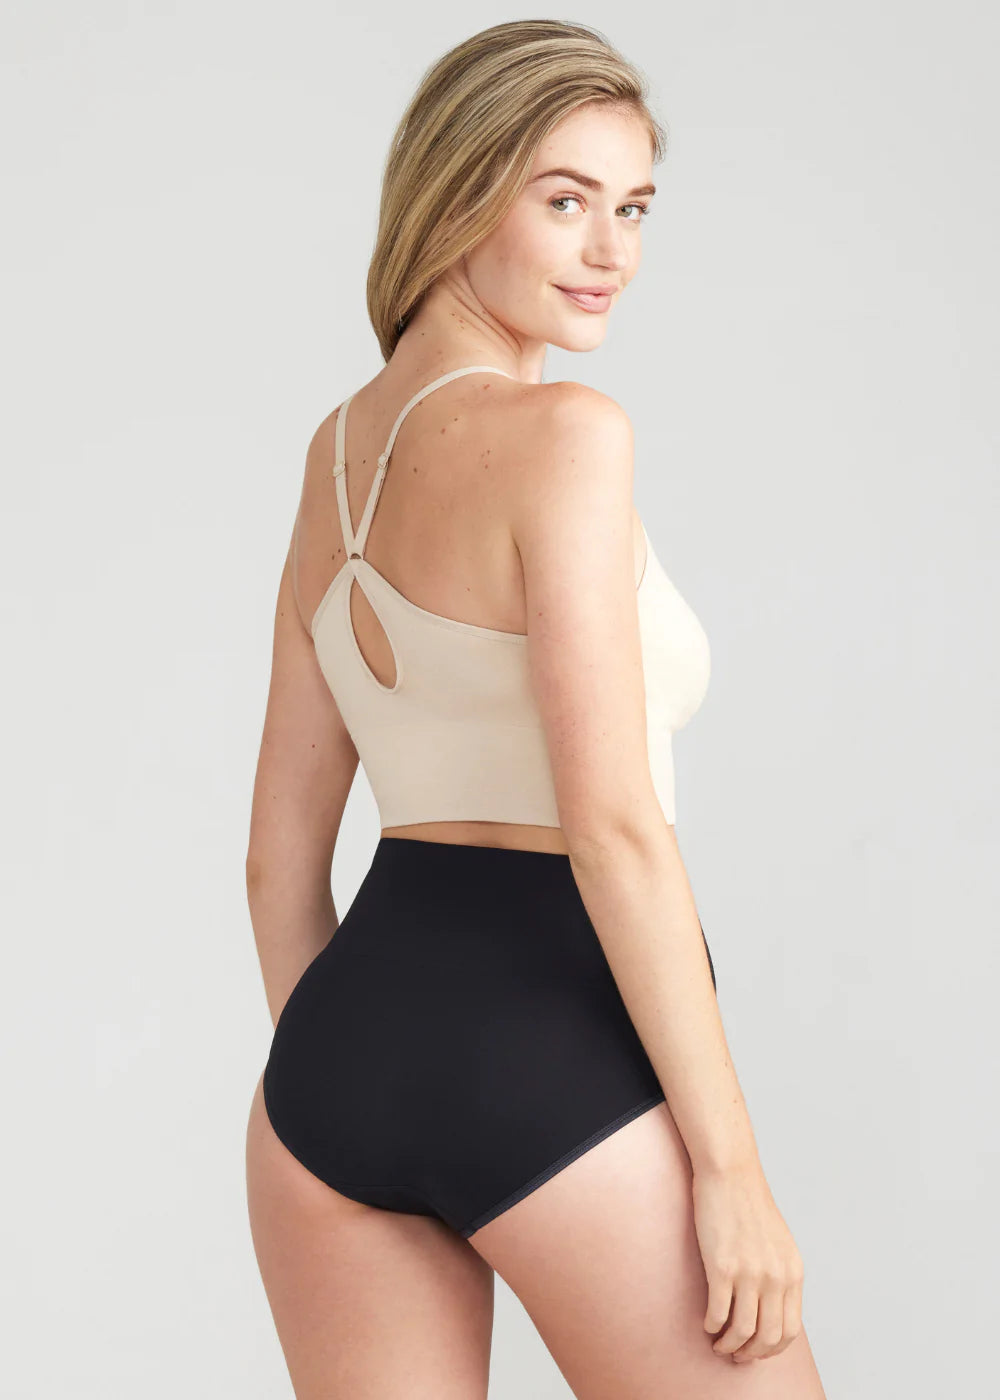 YUMMIE - Brief Shaper - Color Frappe Or Black Size S/M-2X/3X